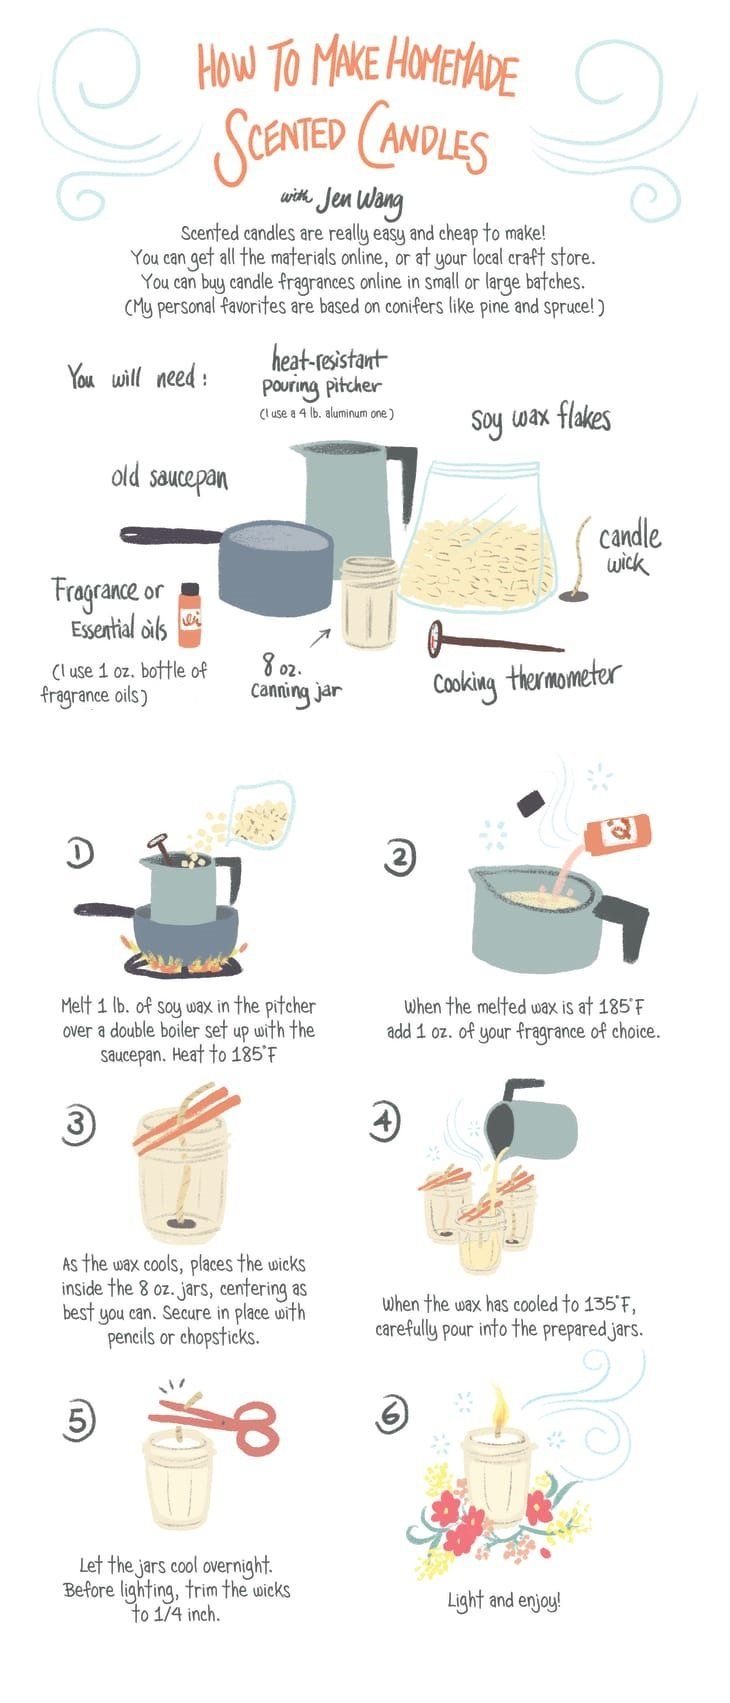 an info sheet describing how to make homemade sconer crepes with instructions